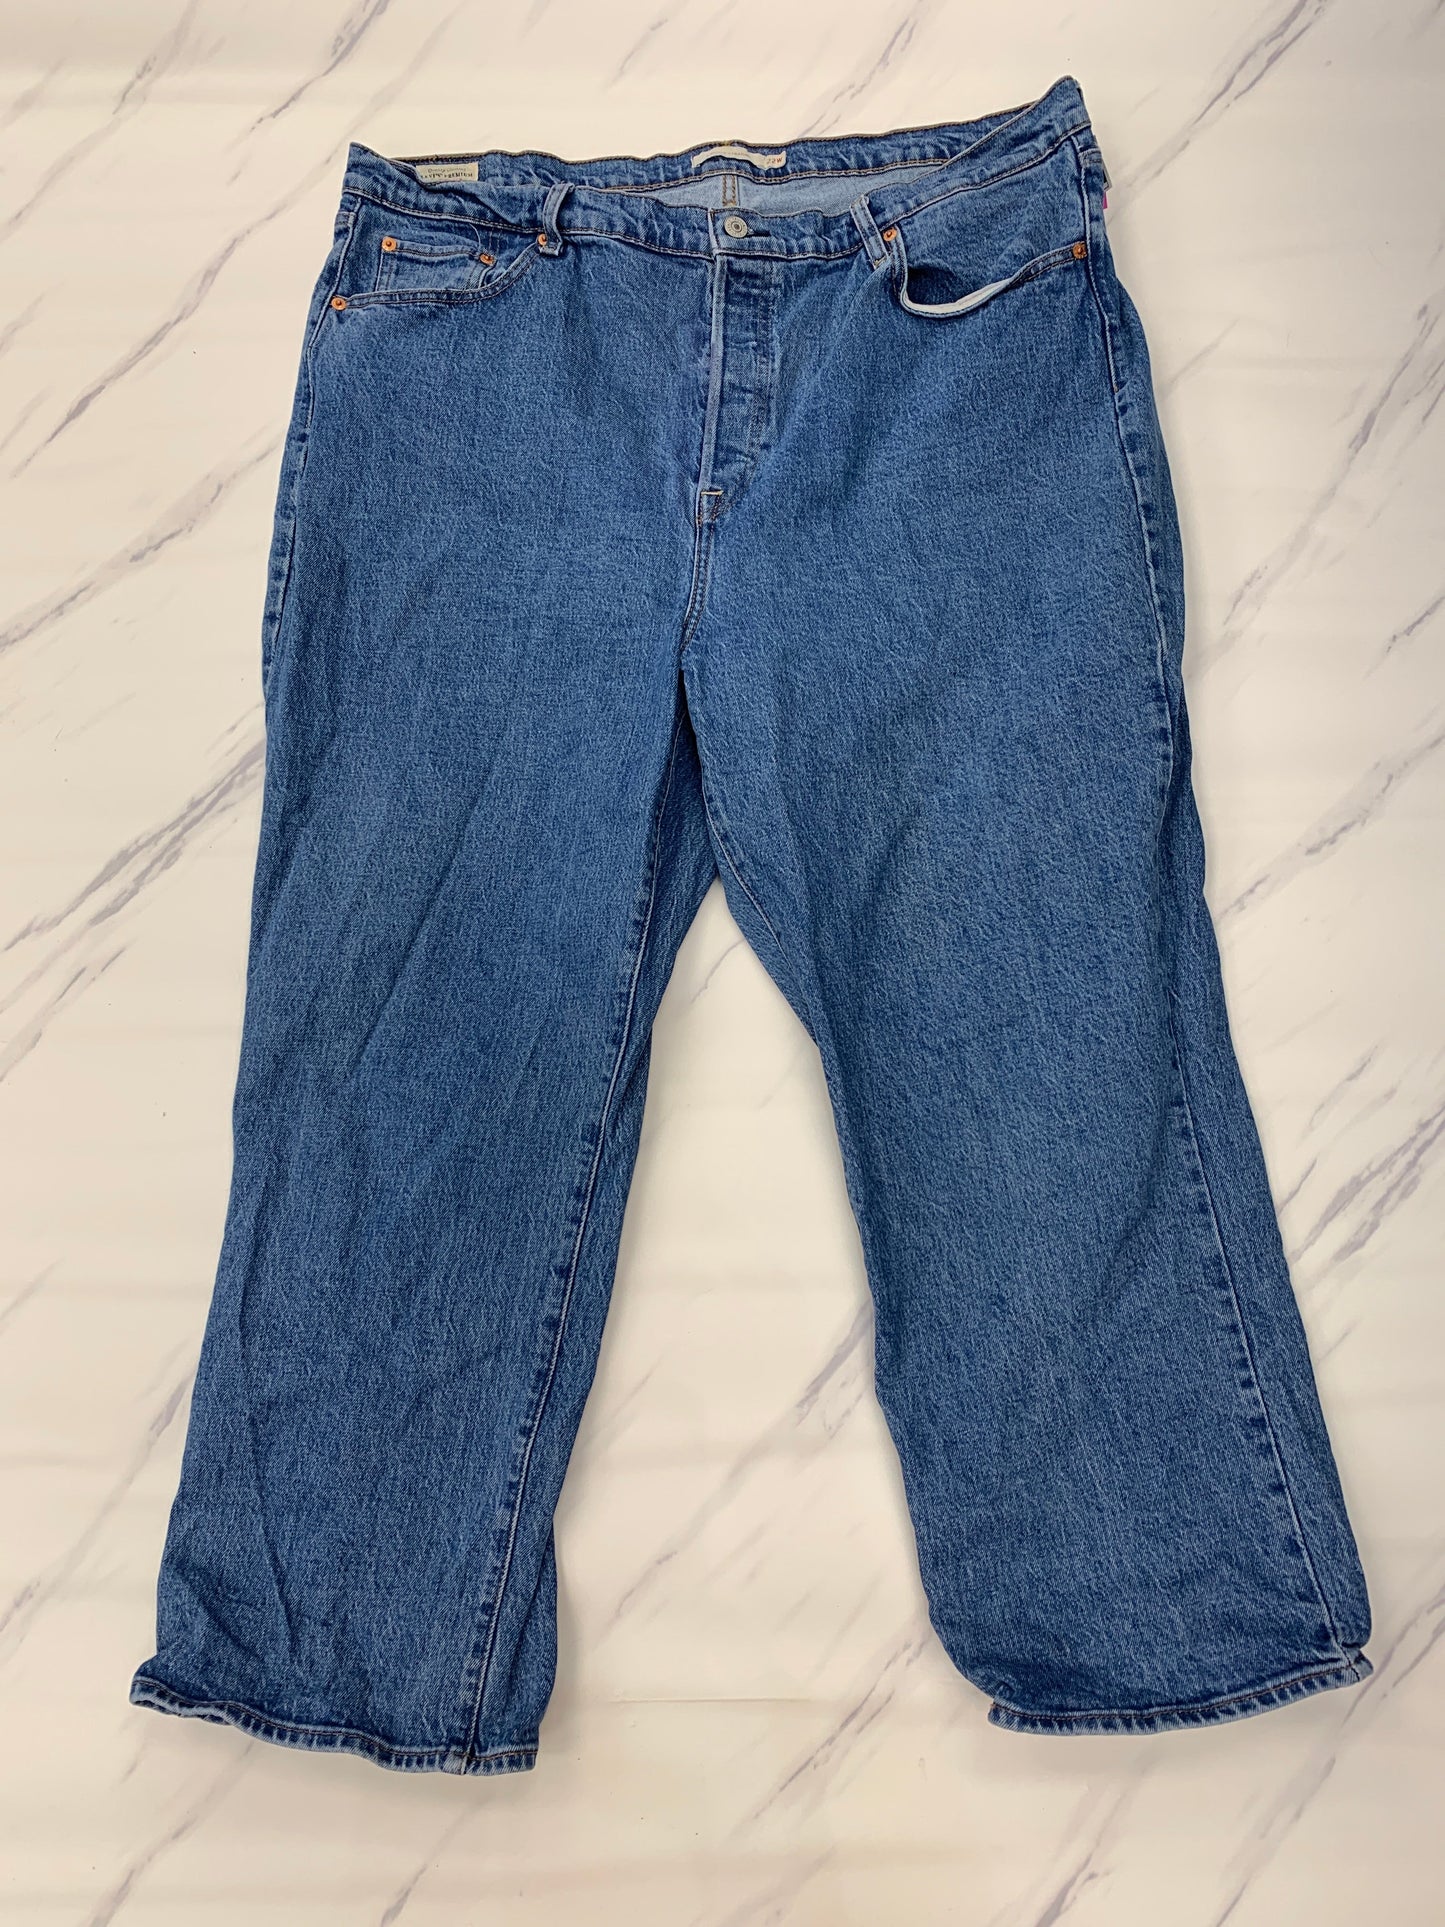 Jeans Straight Levis, Size 22w